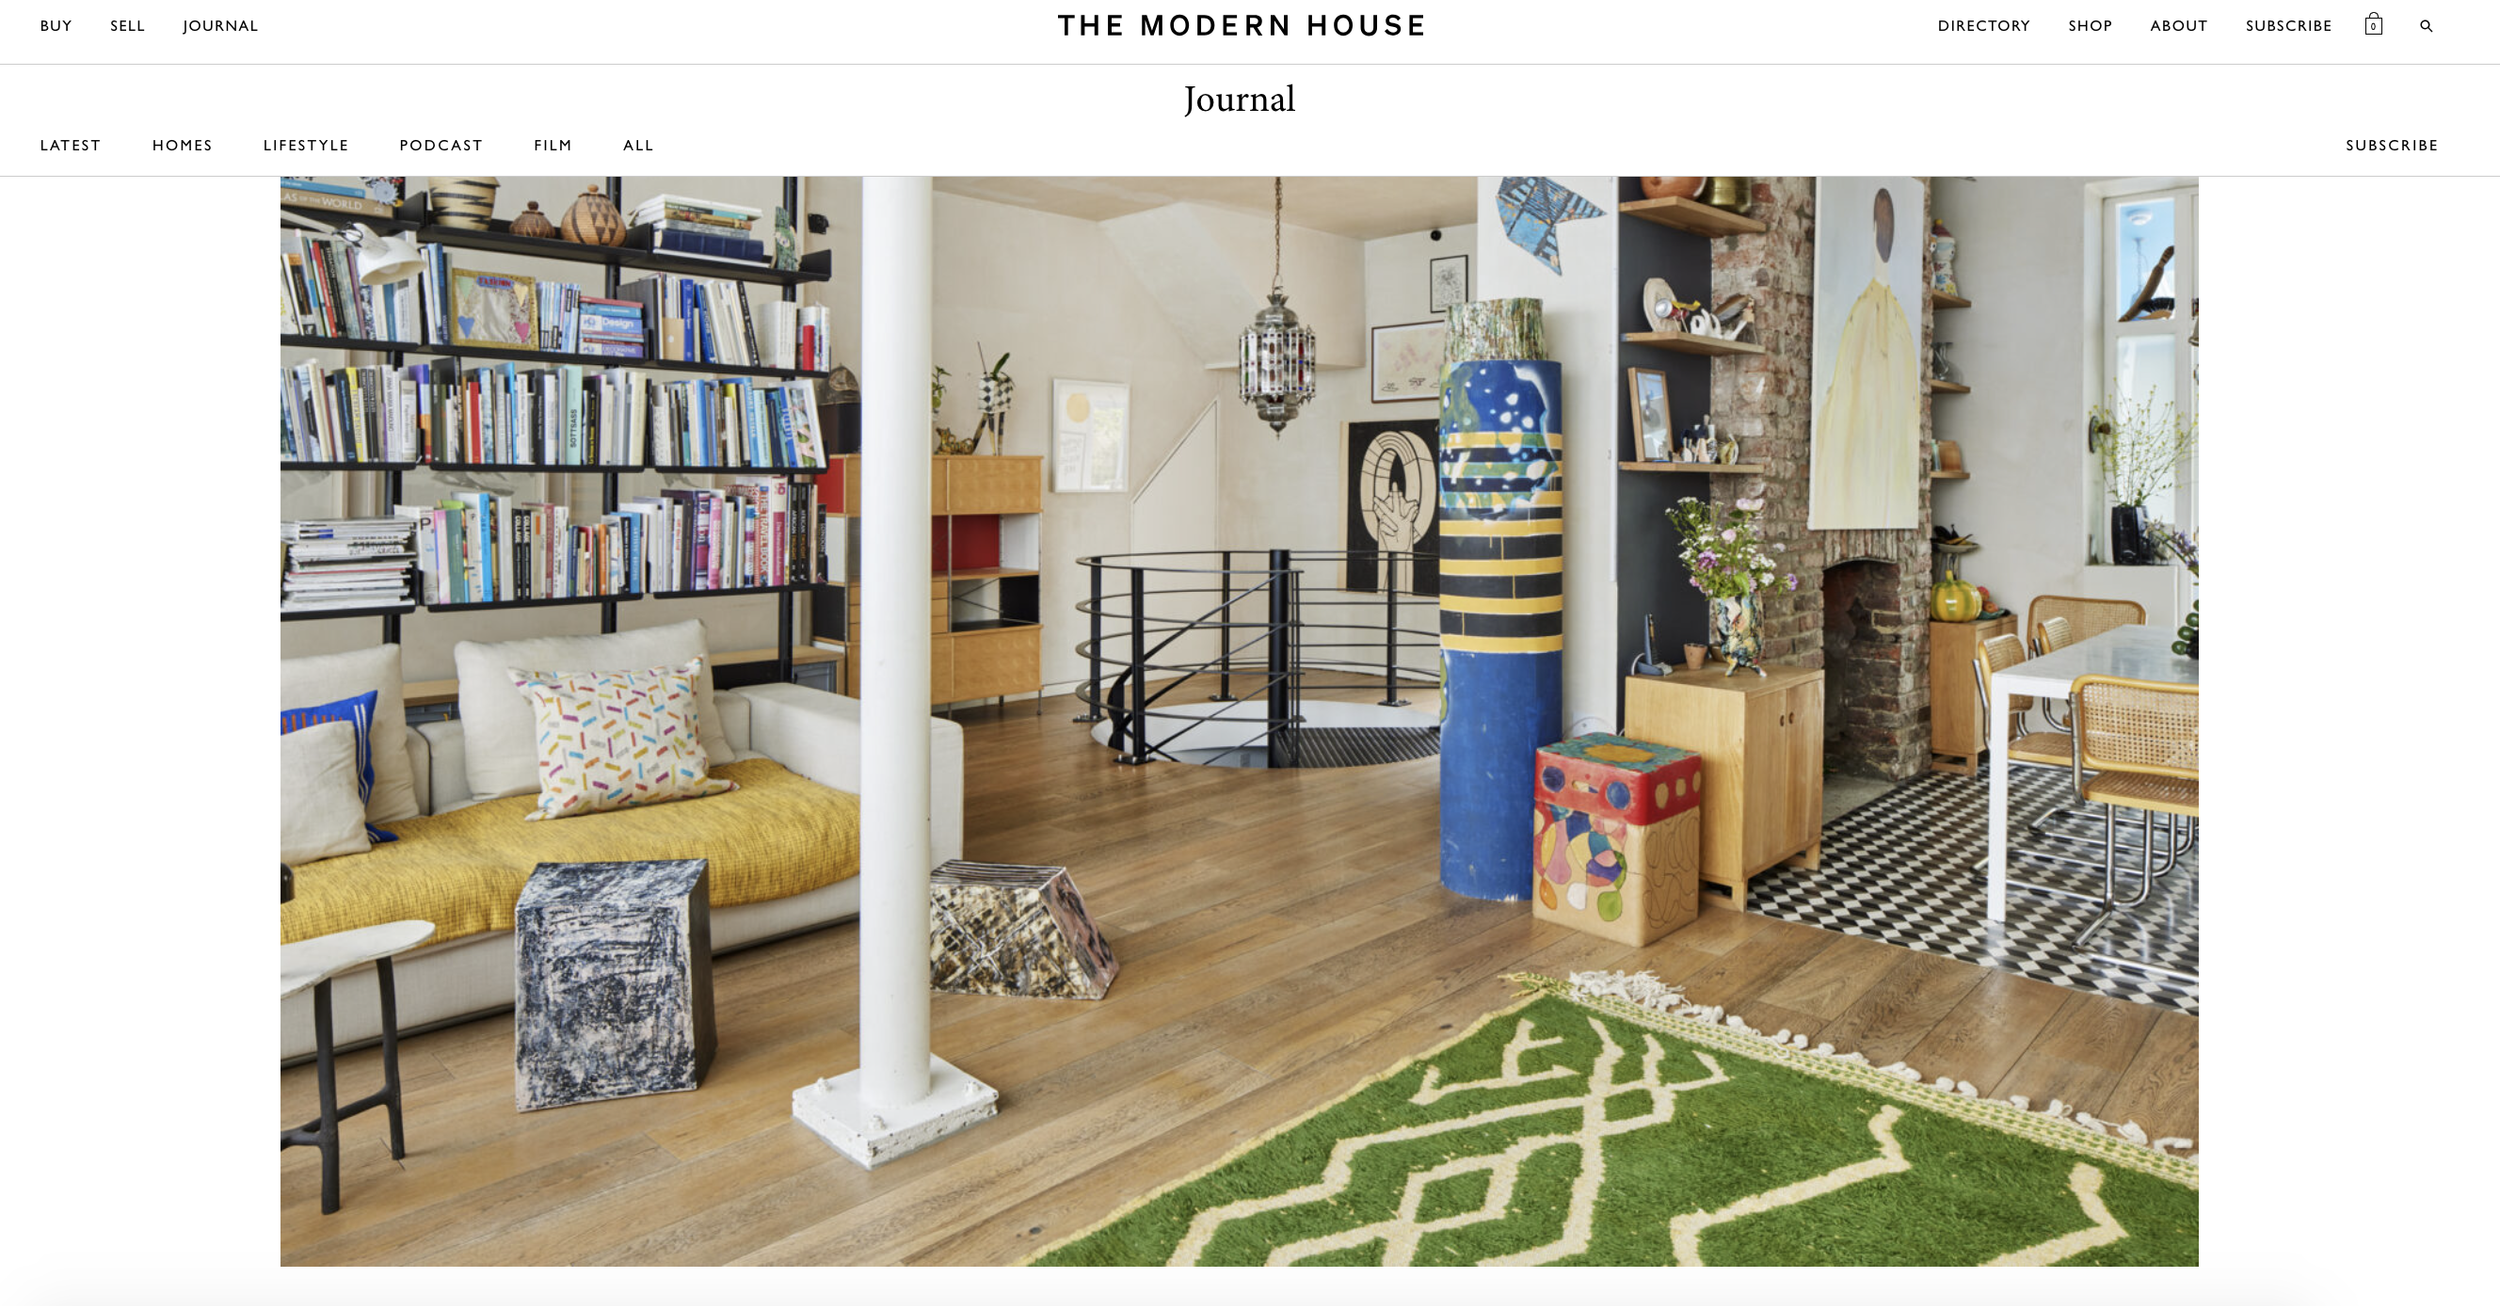 https://www.themodernhouse.com/journal/artist-francesca-anfossi-on-transforming-a-former-clothes-workshop-into-an-eclectic-open-living-space-in-camden-north-london